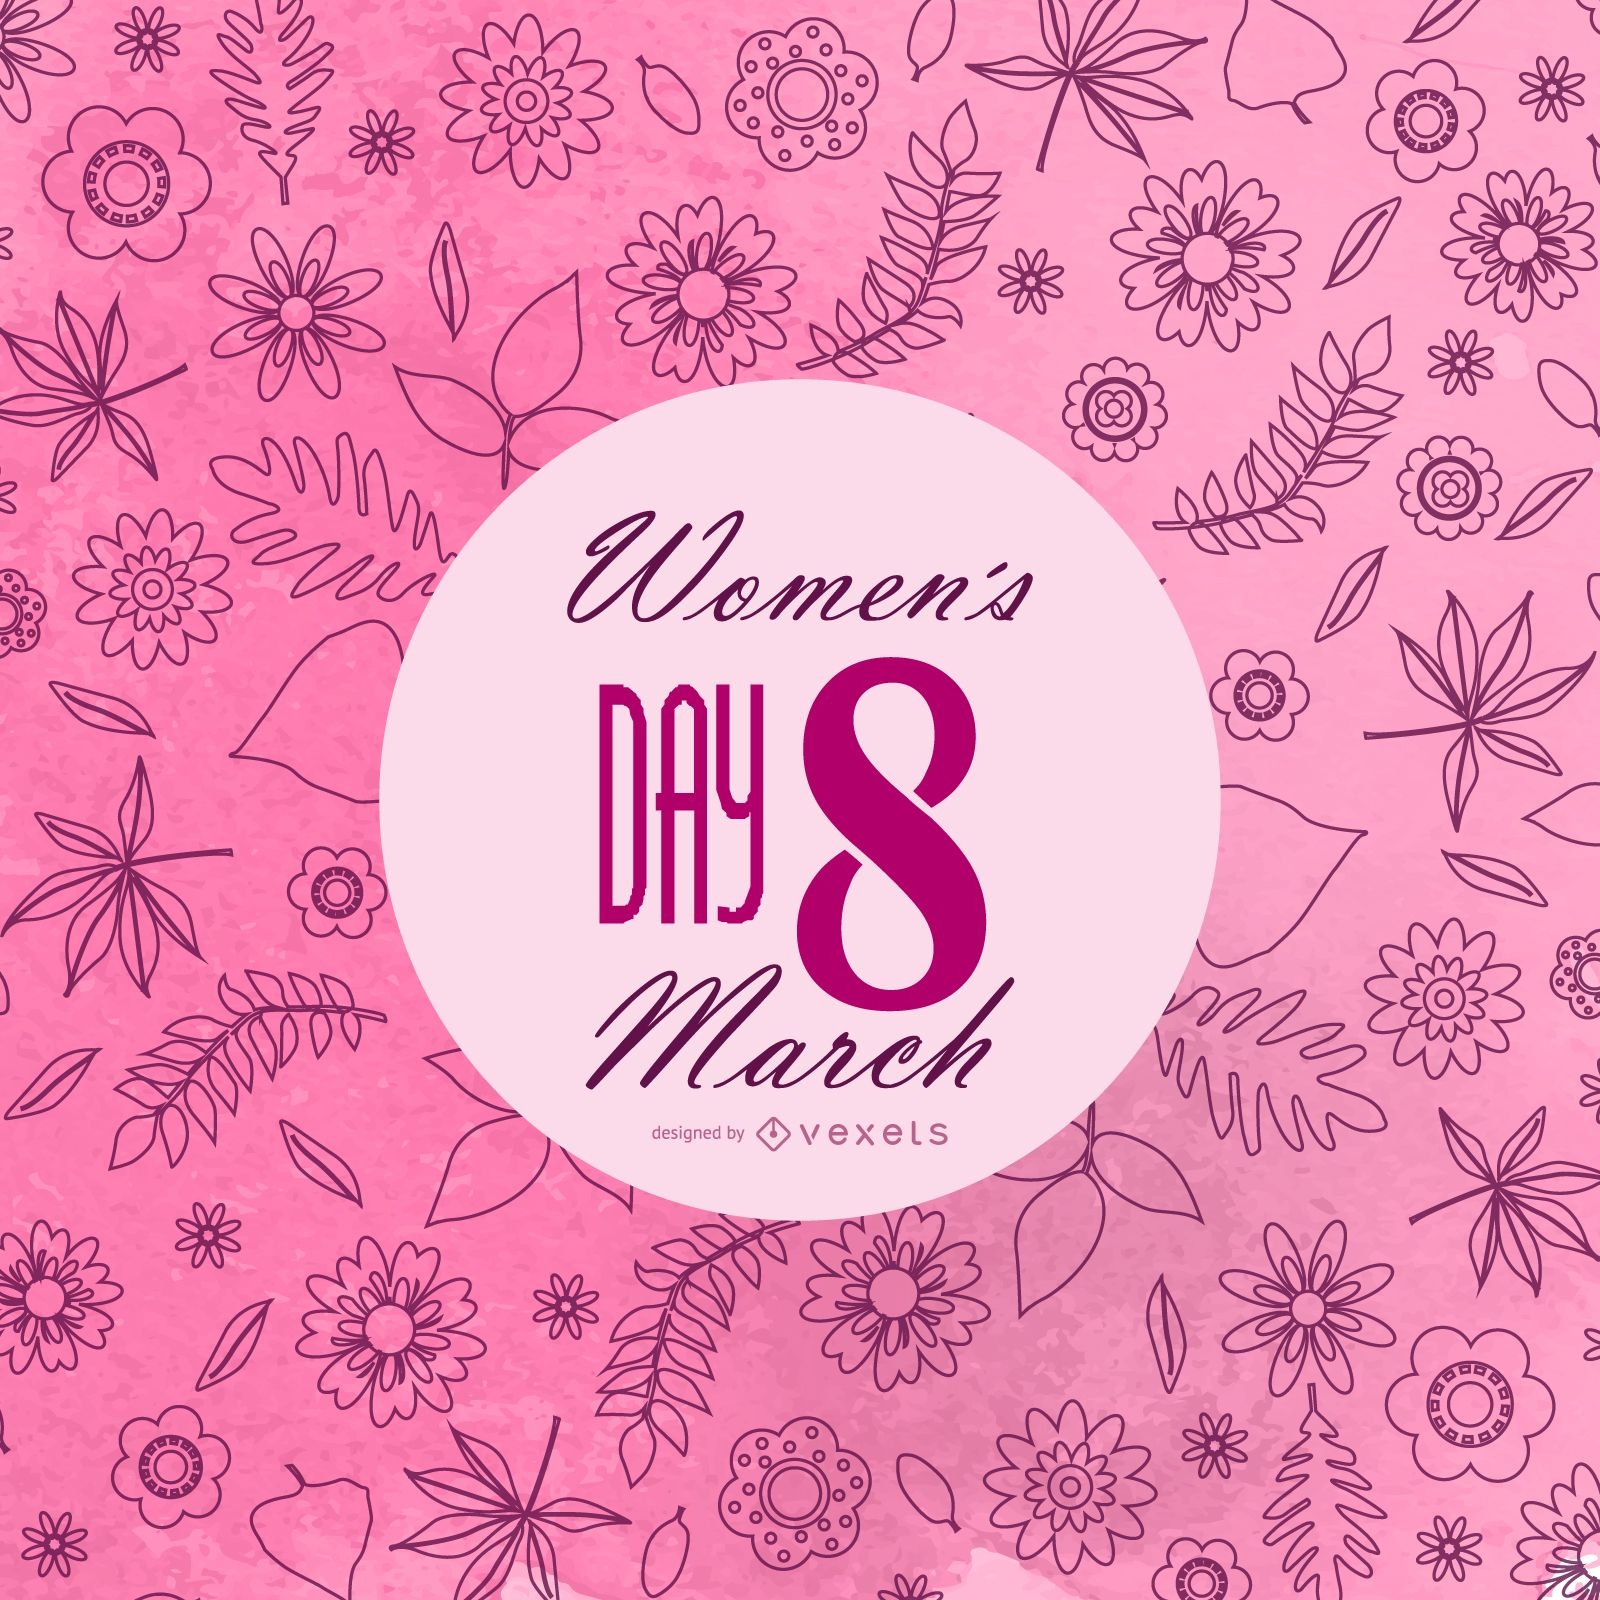 8 March Women's Day post